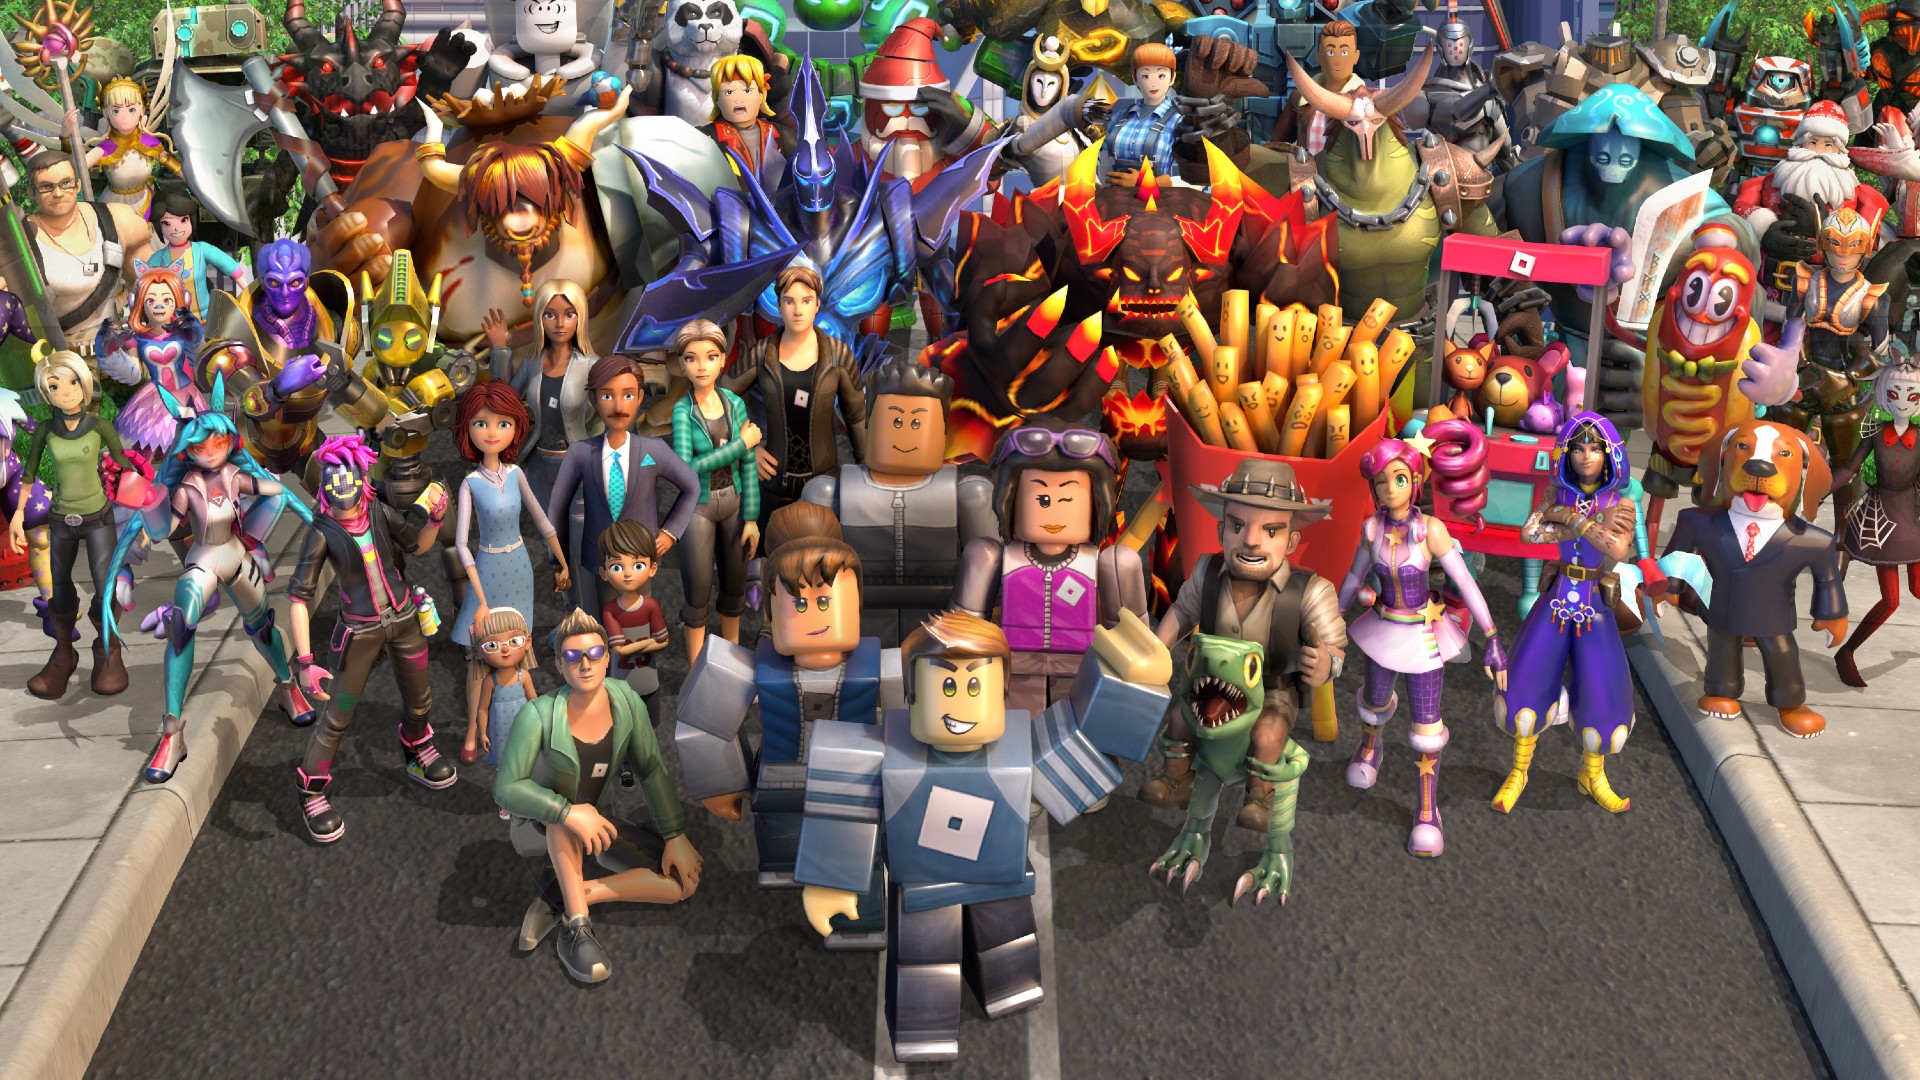 Roblox promo codes list April 2022 – how to redeem